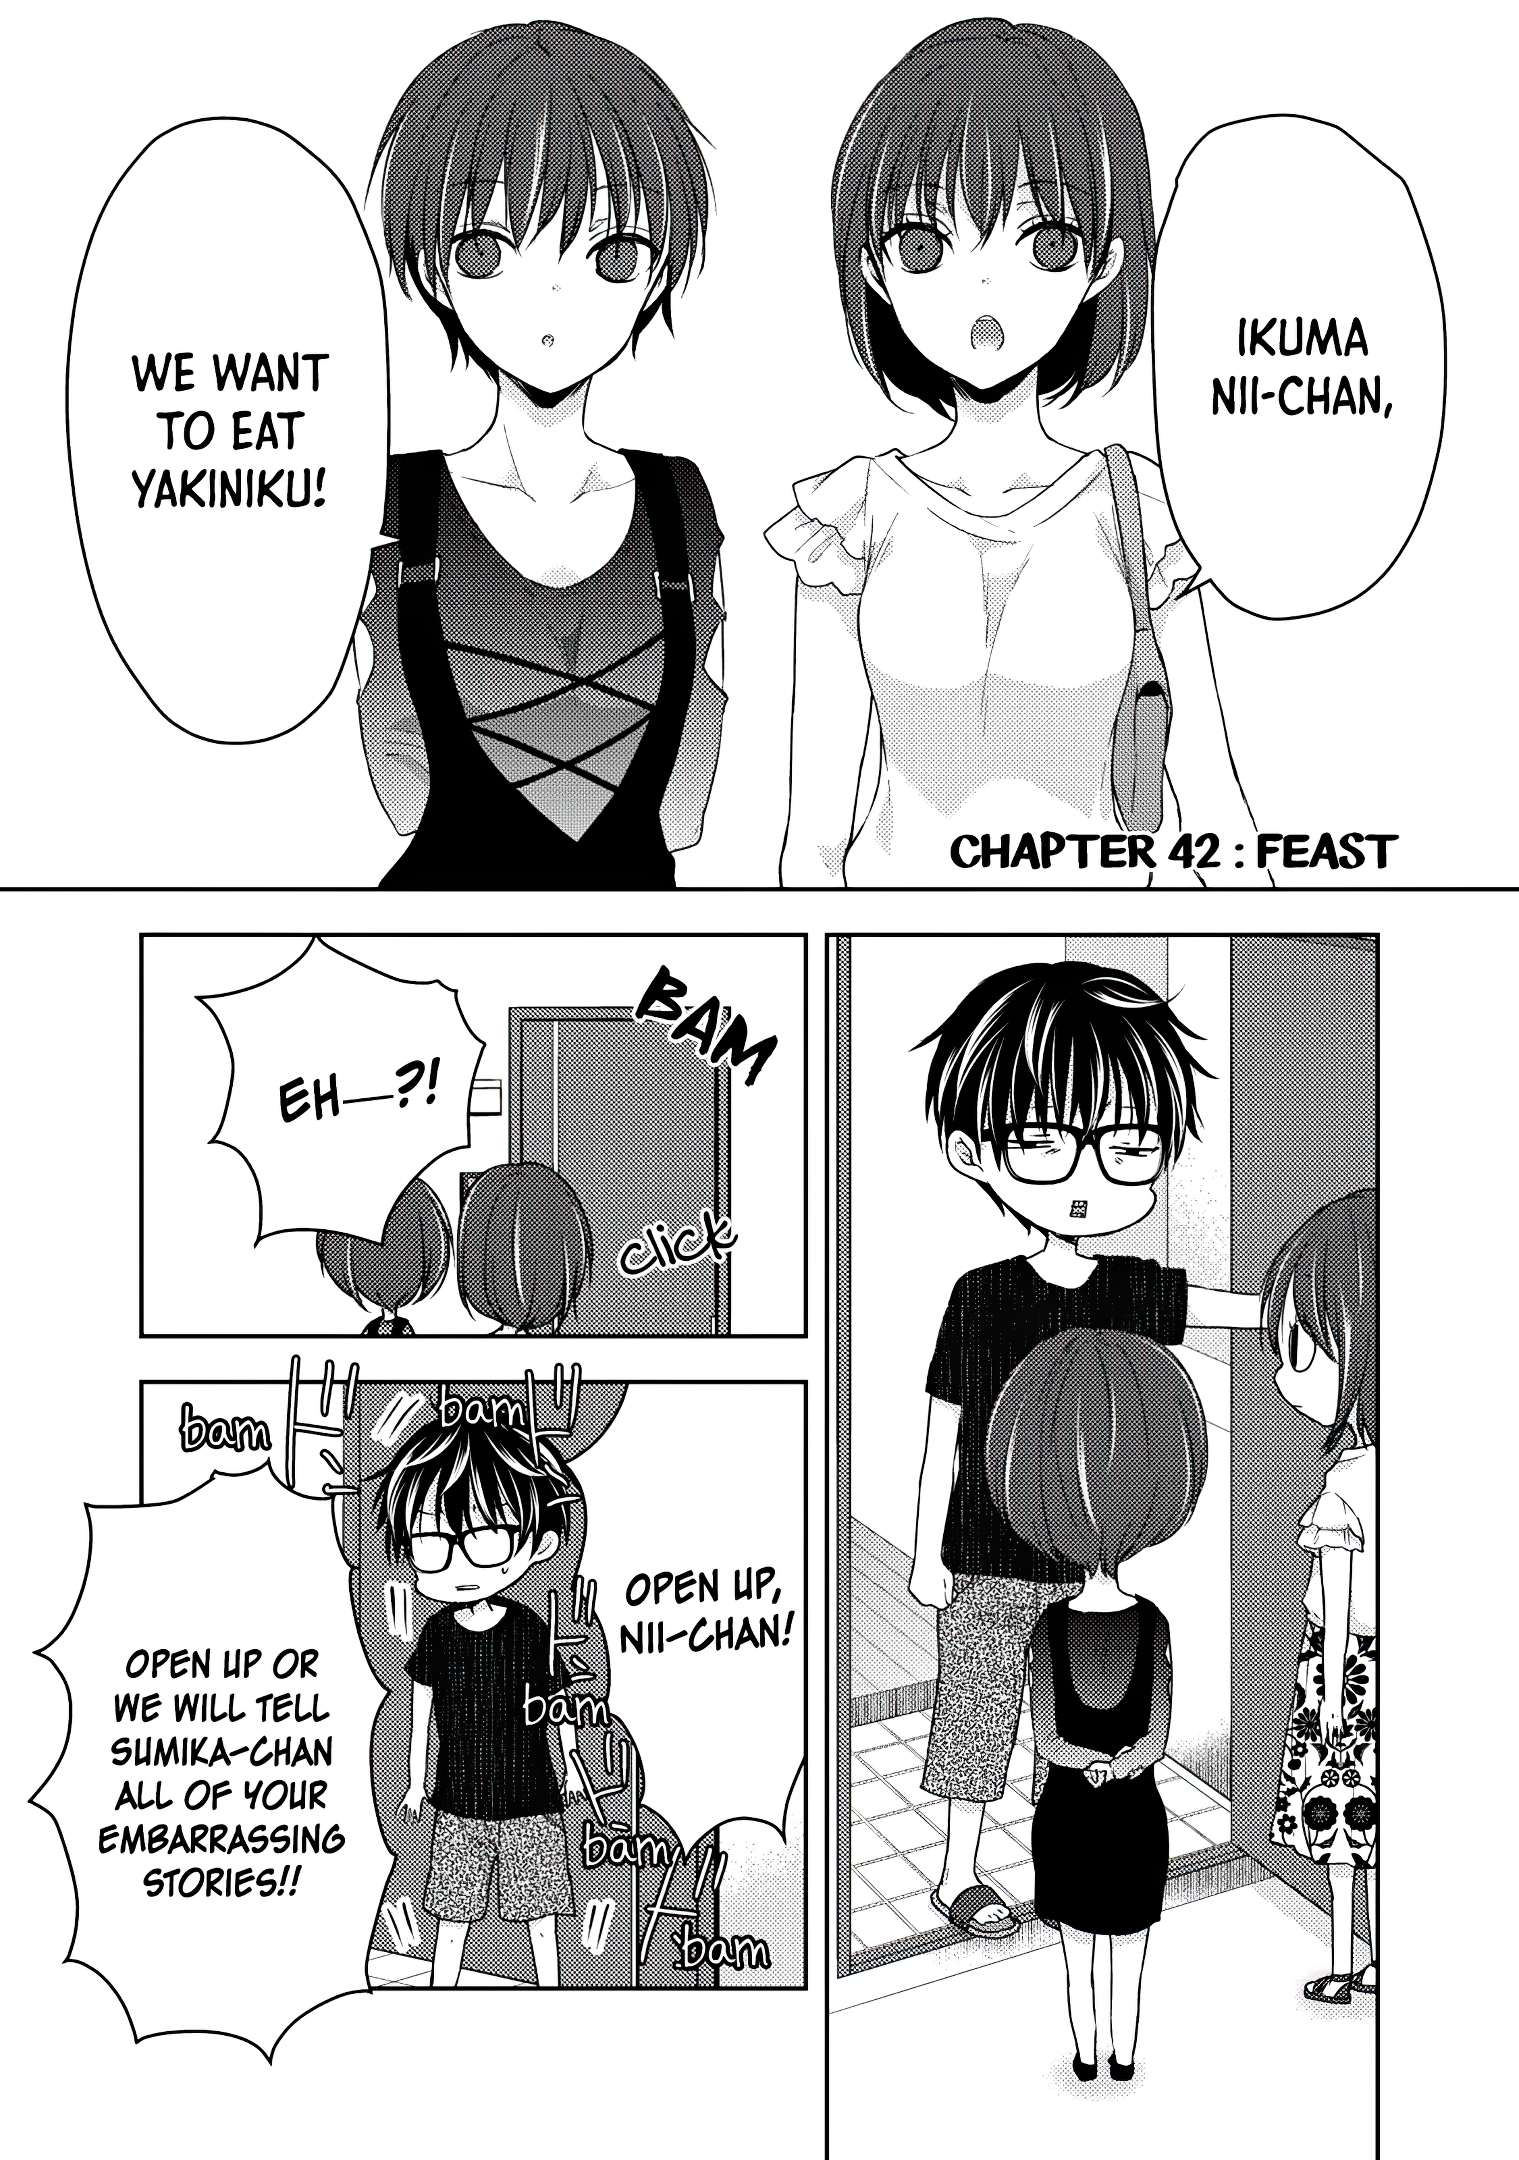 We May Be An Inexperienced Couple But... Vol.5 Chapter 42: Feast - Picture 2